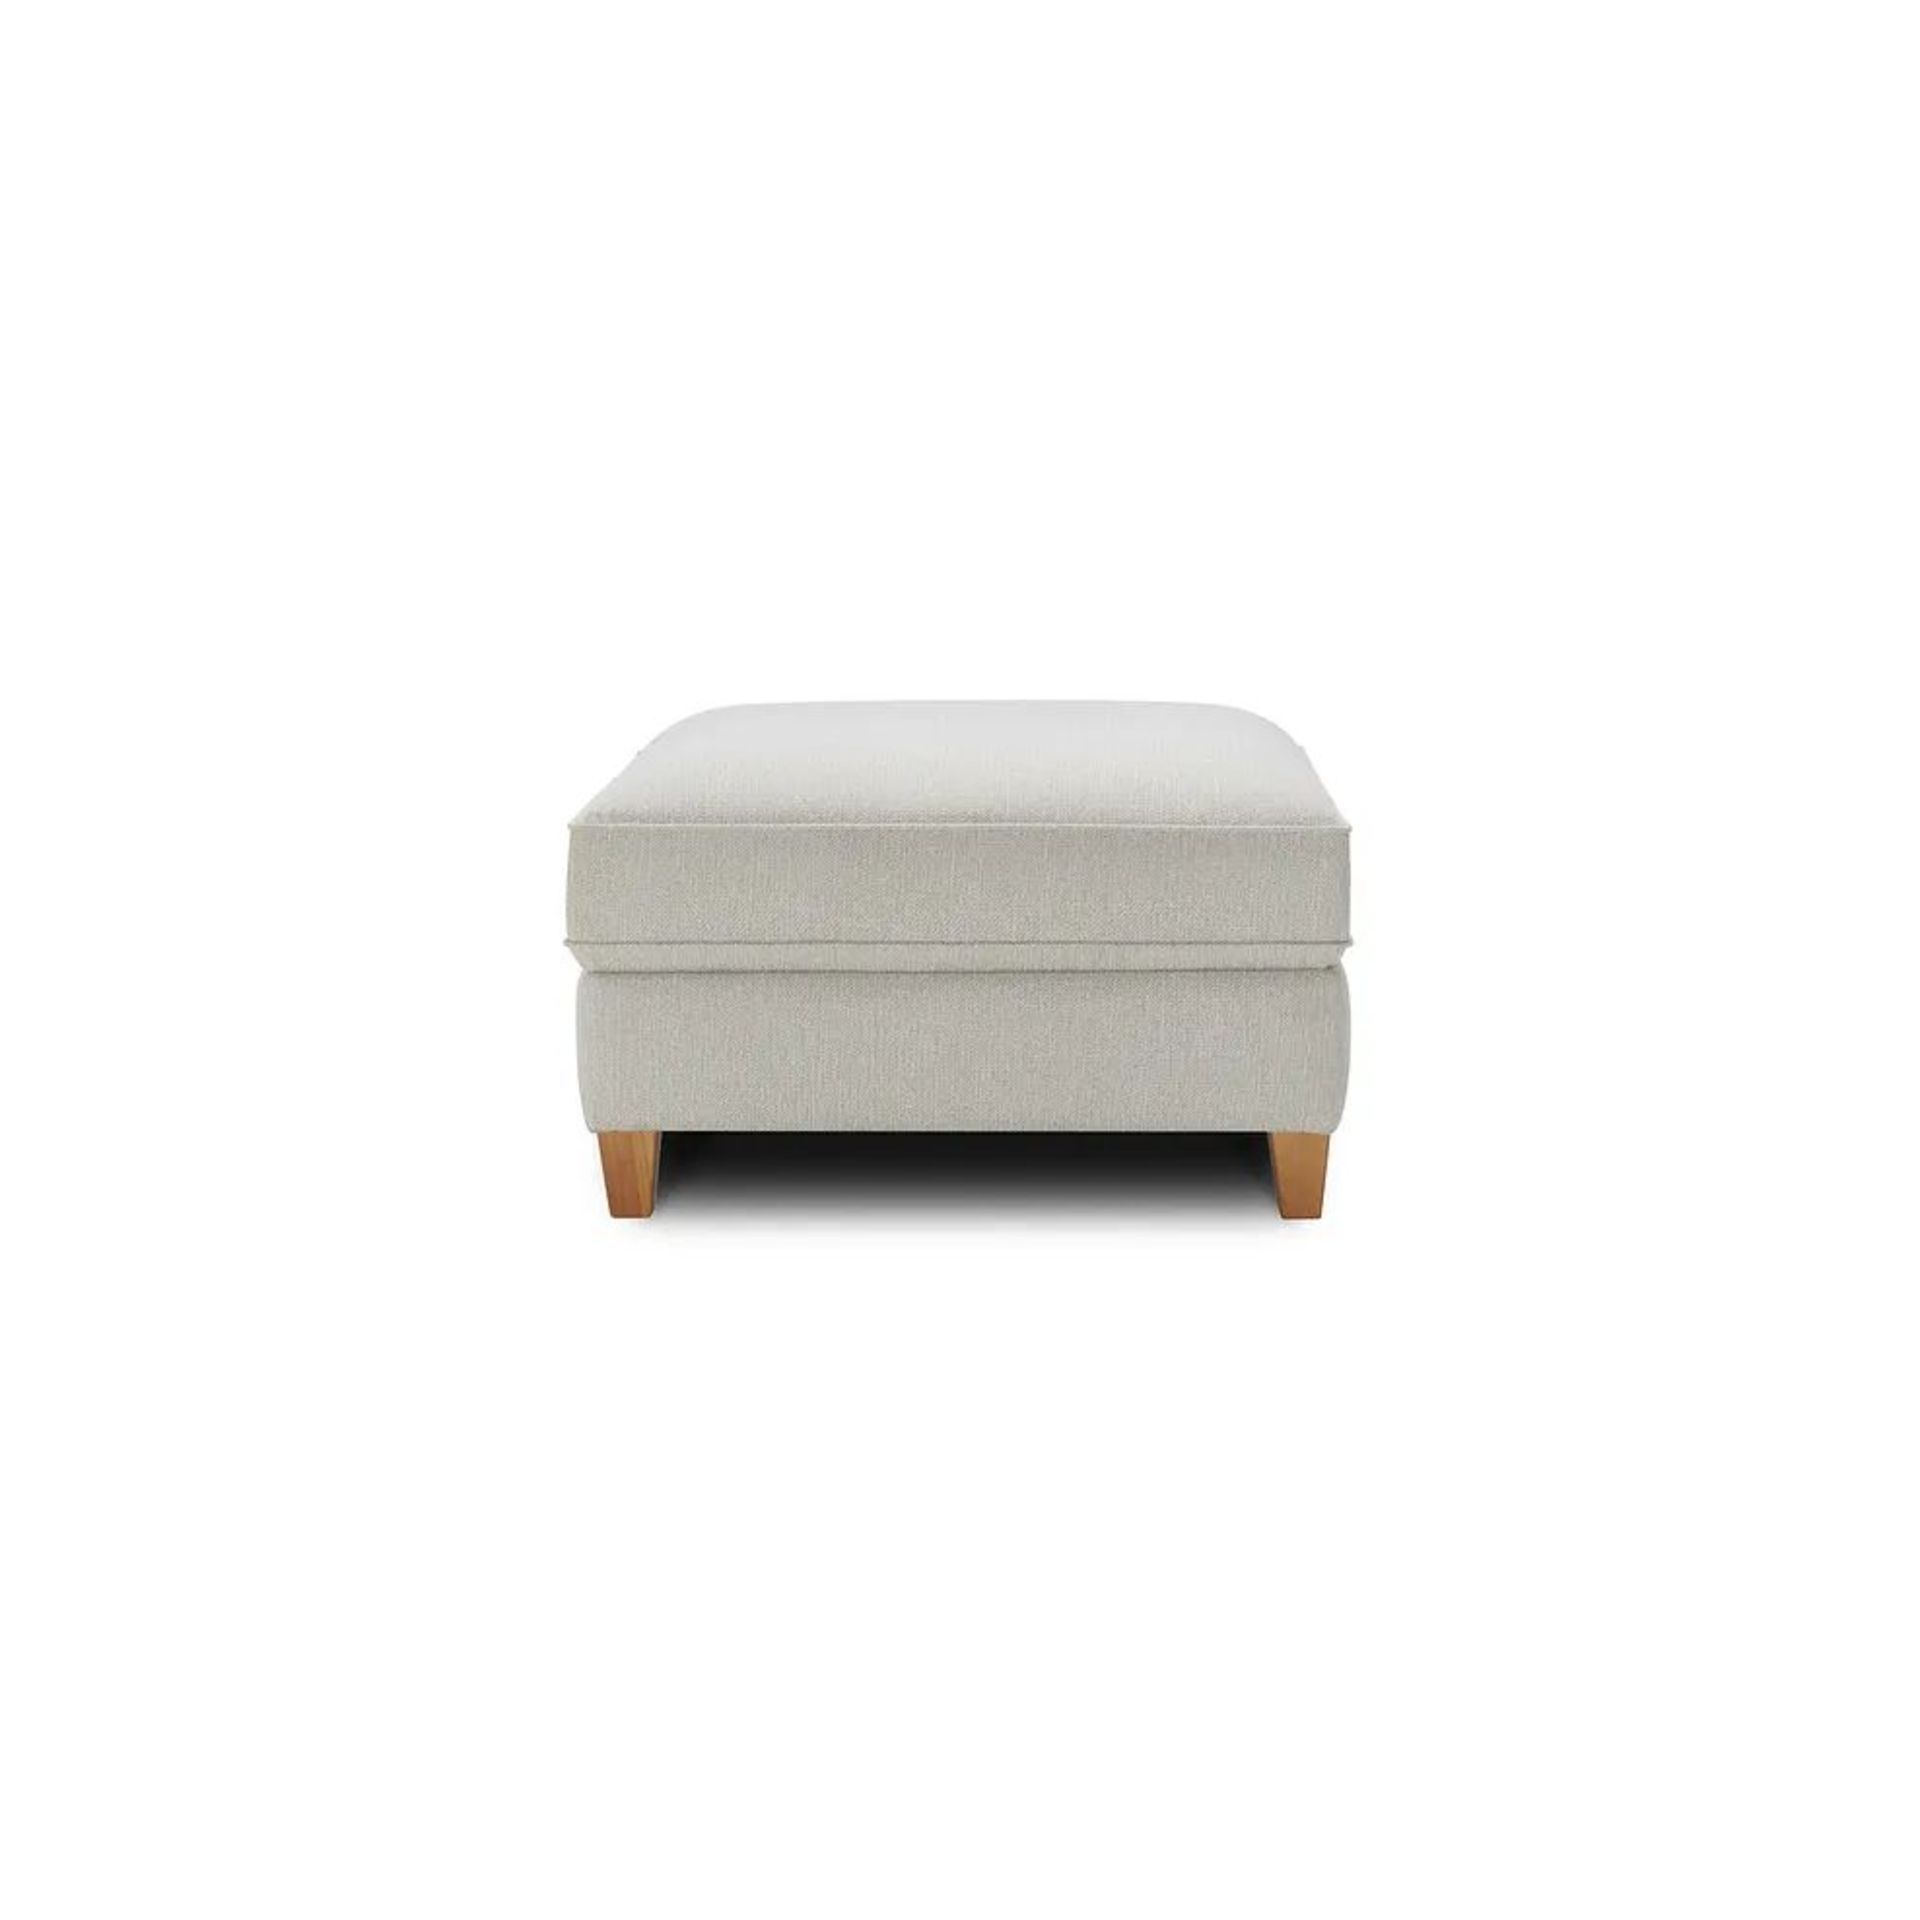 BRAND NEW INCA Large Storage Footstool - SILVER FABRIC. RRP £529. Our large Inca storage footstool - Image 2 of 7